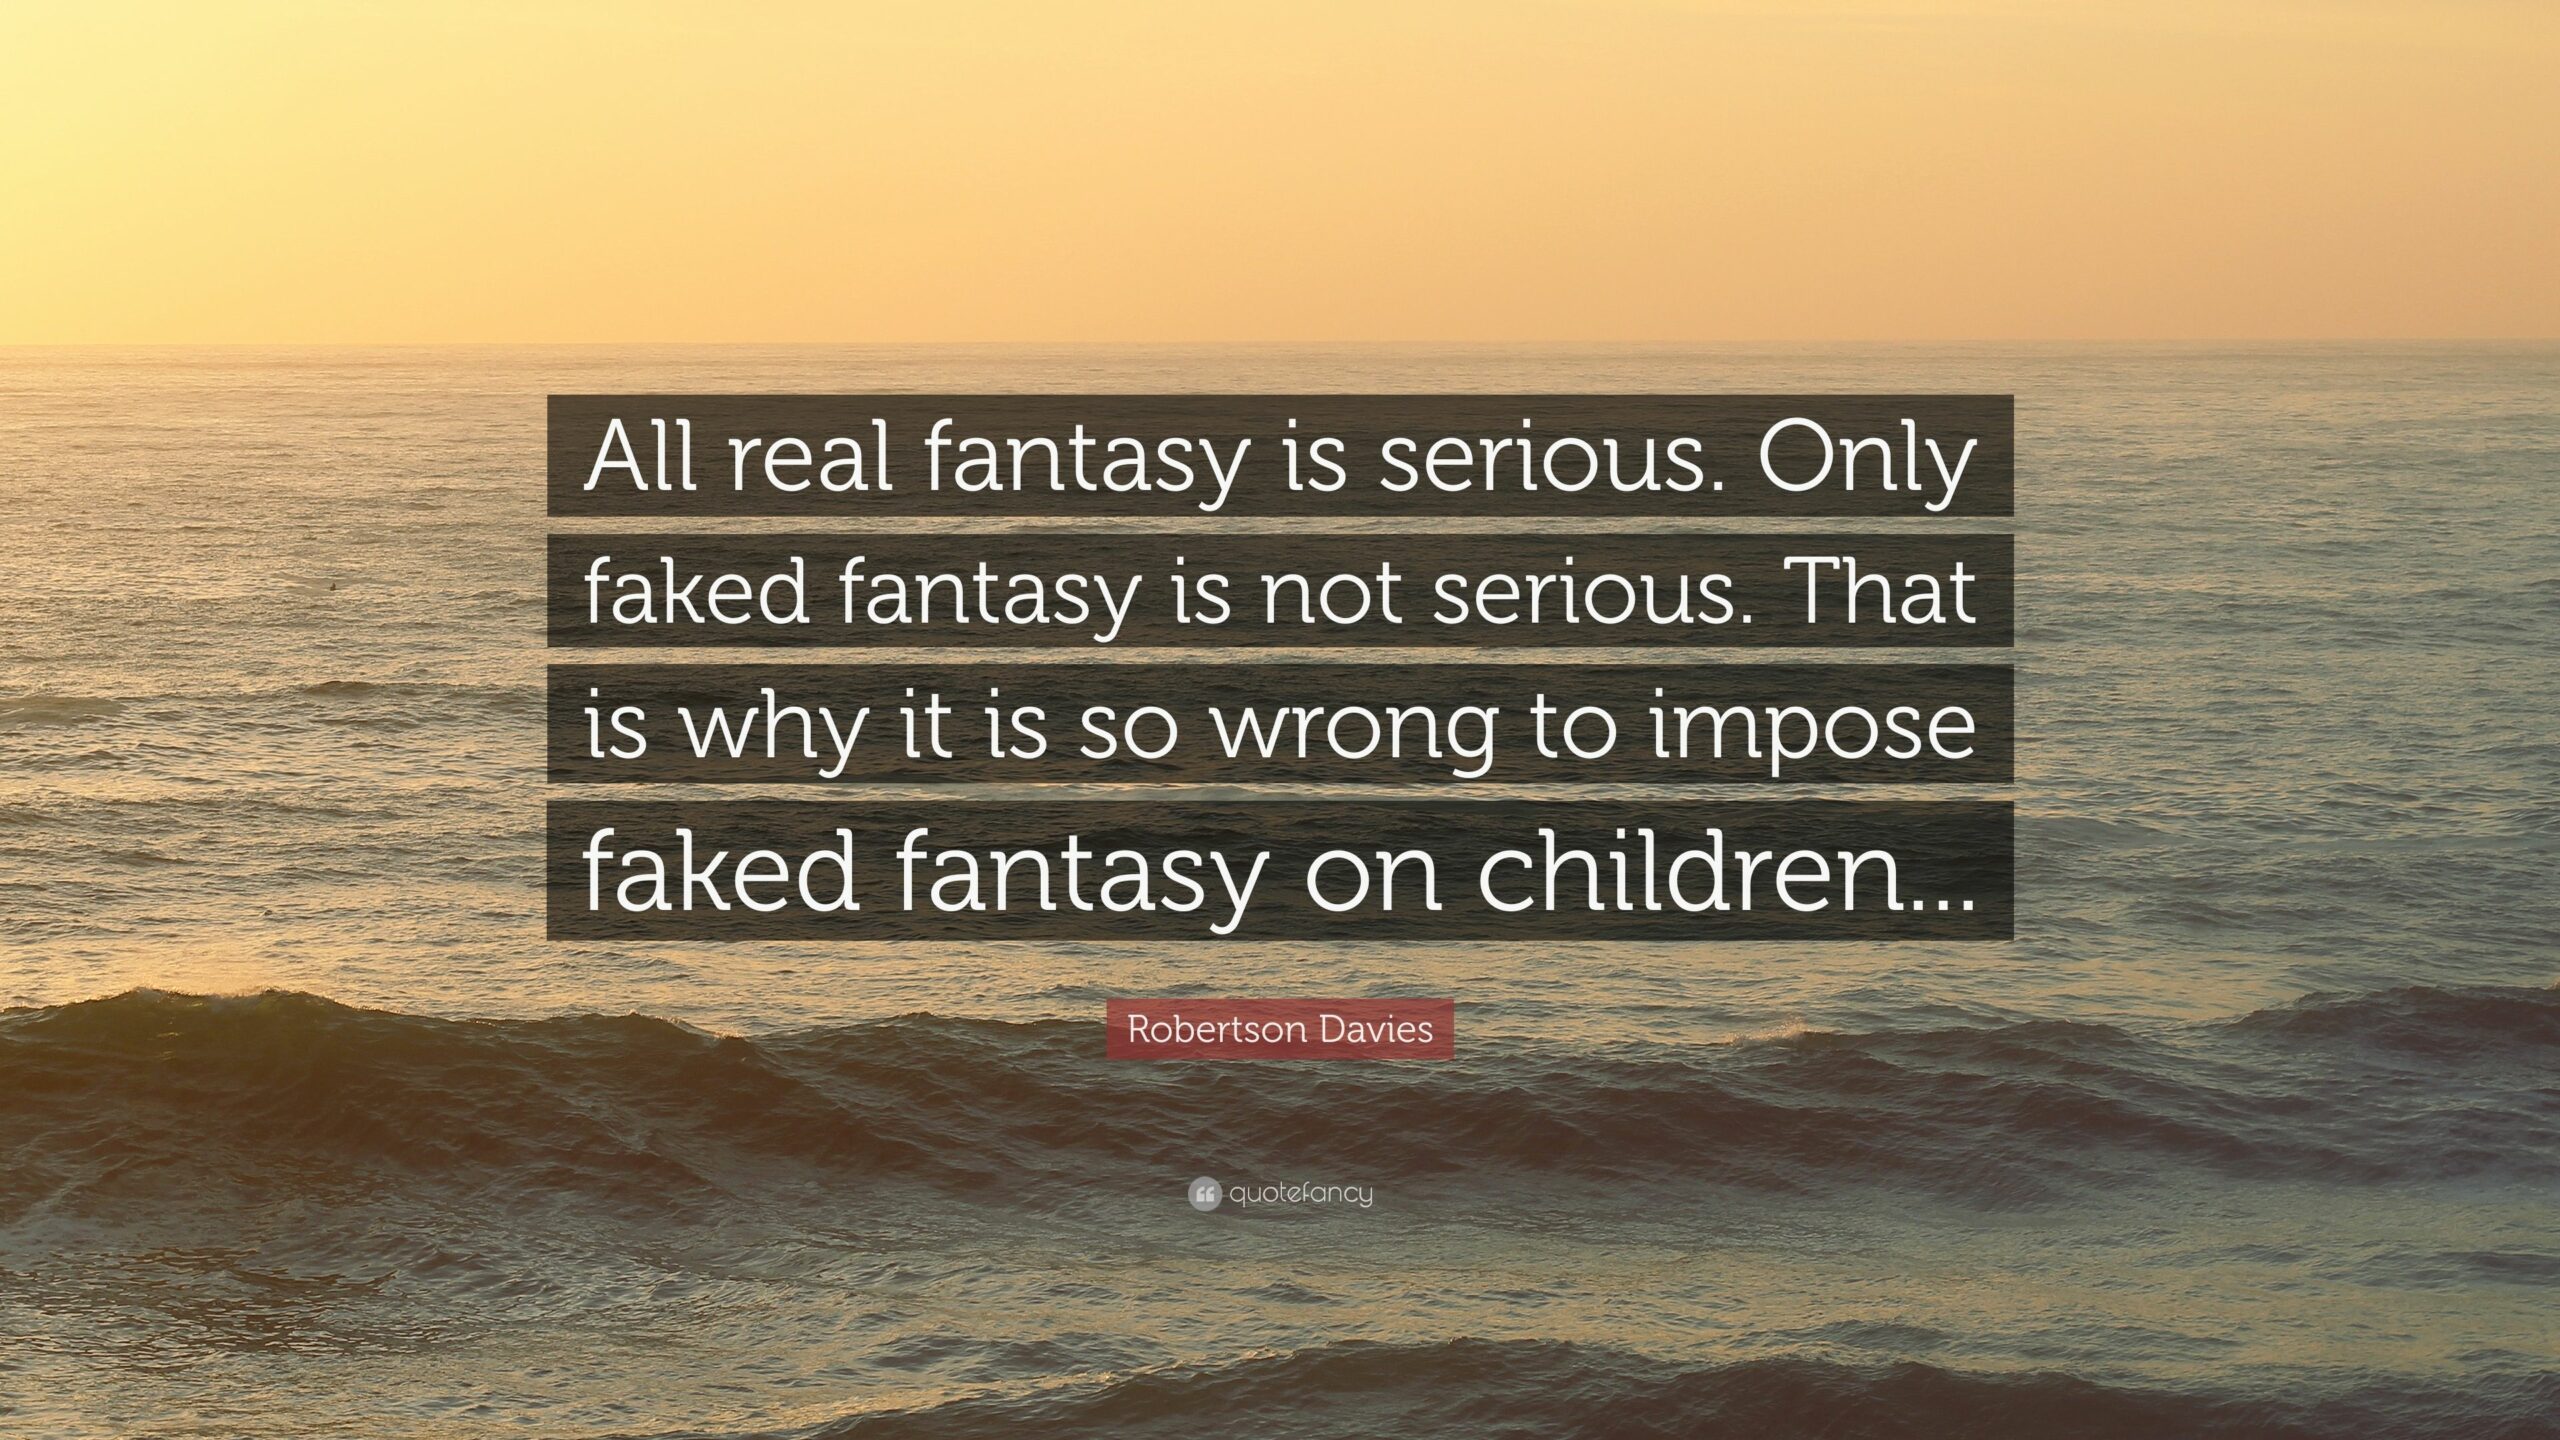 Why is fantasy not real?